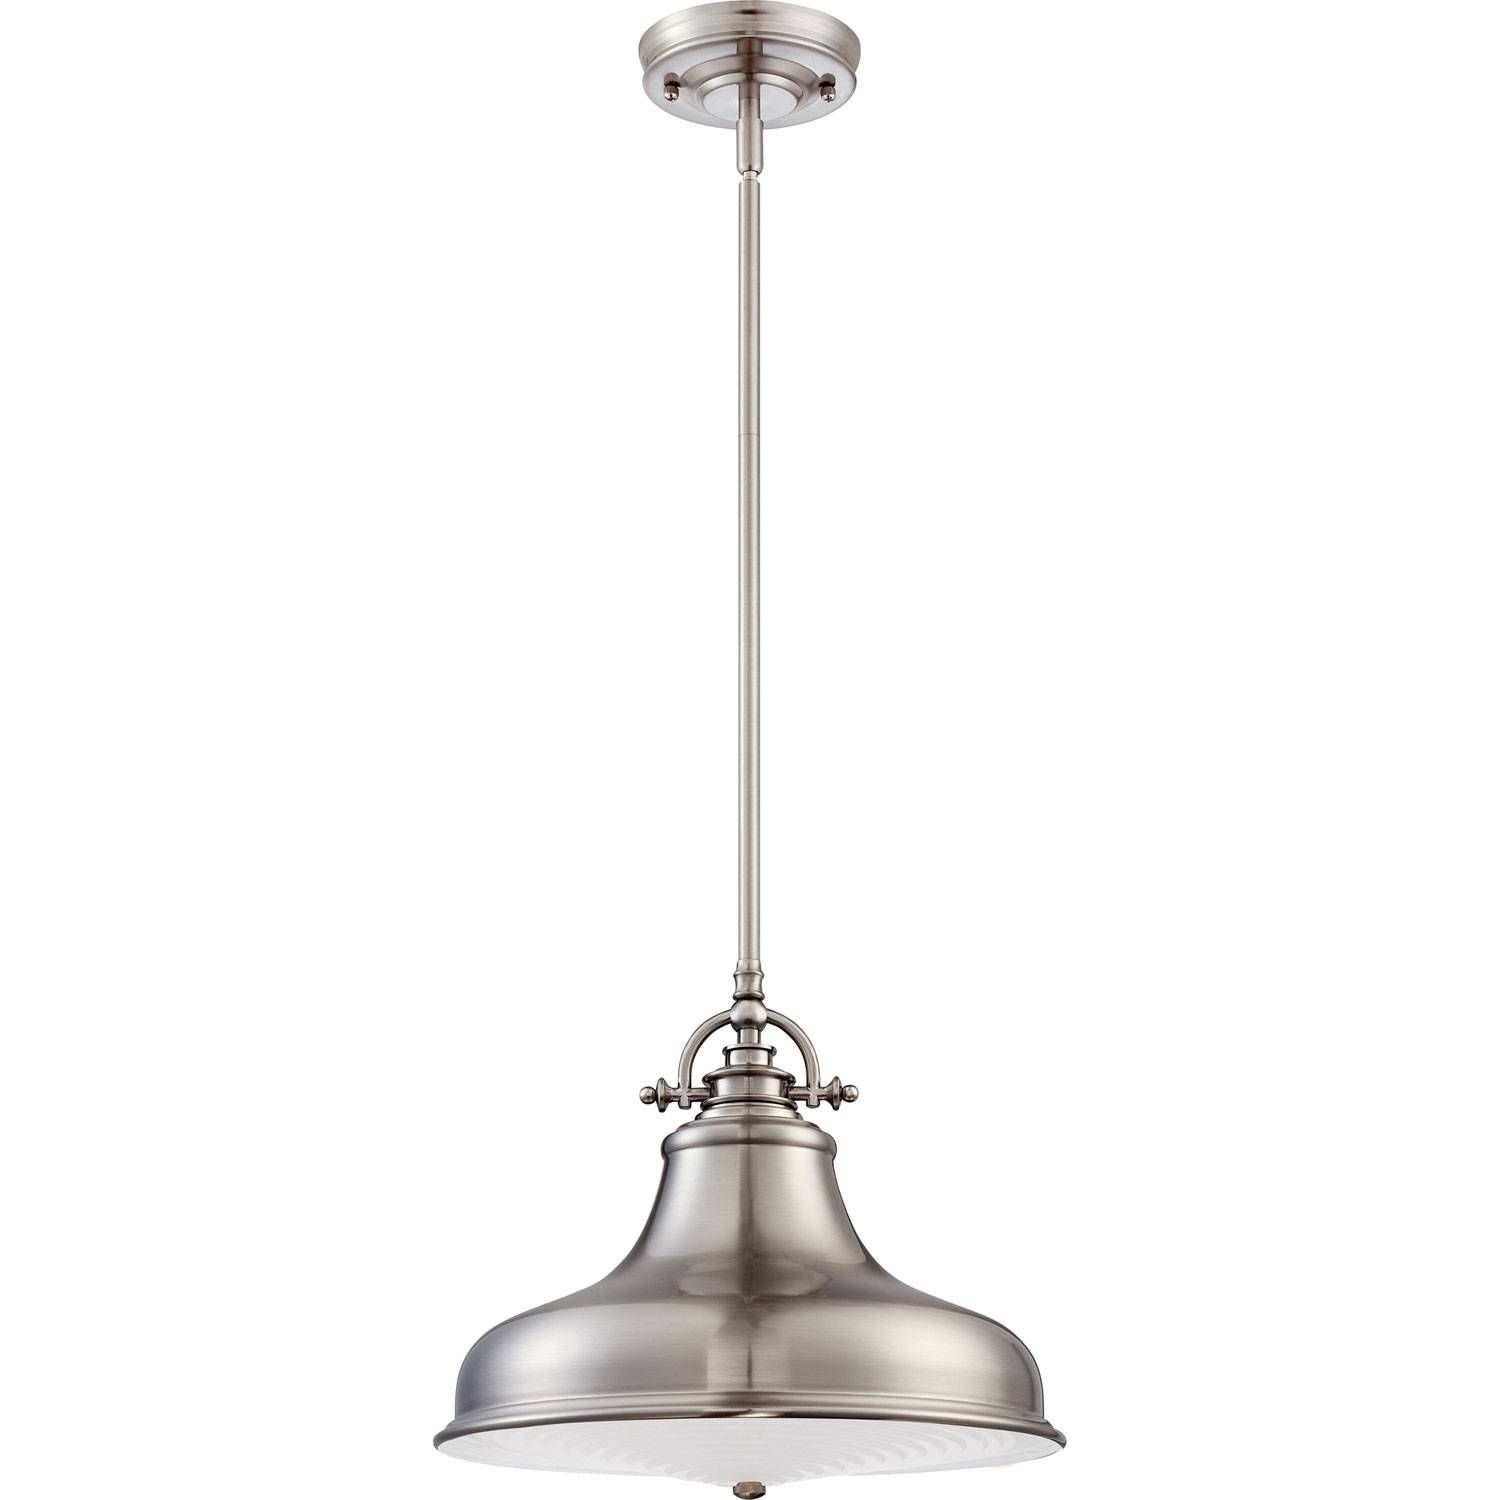 Quoizel Emery Brushed Nickel One Light Pendant On Sale Throughout Brushed Nickel Pendant Lights (View 8 of 15)